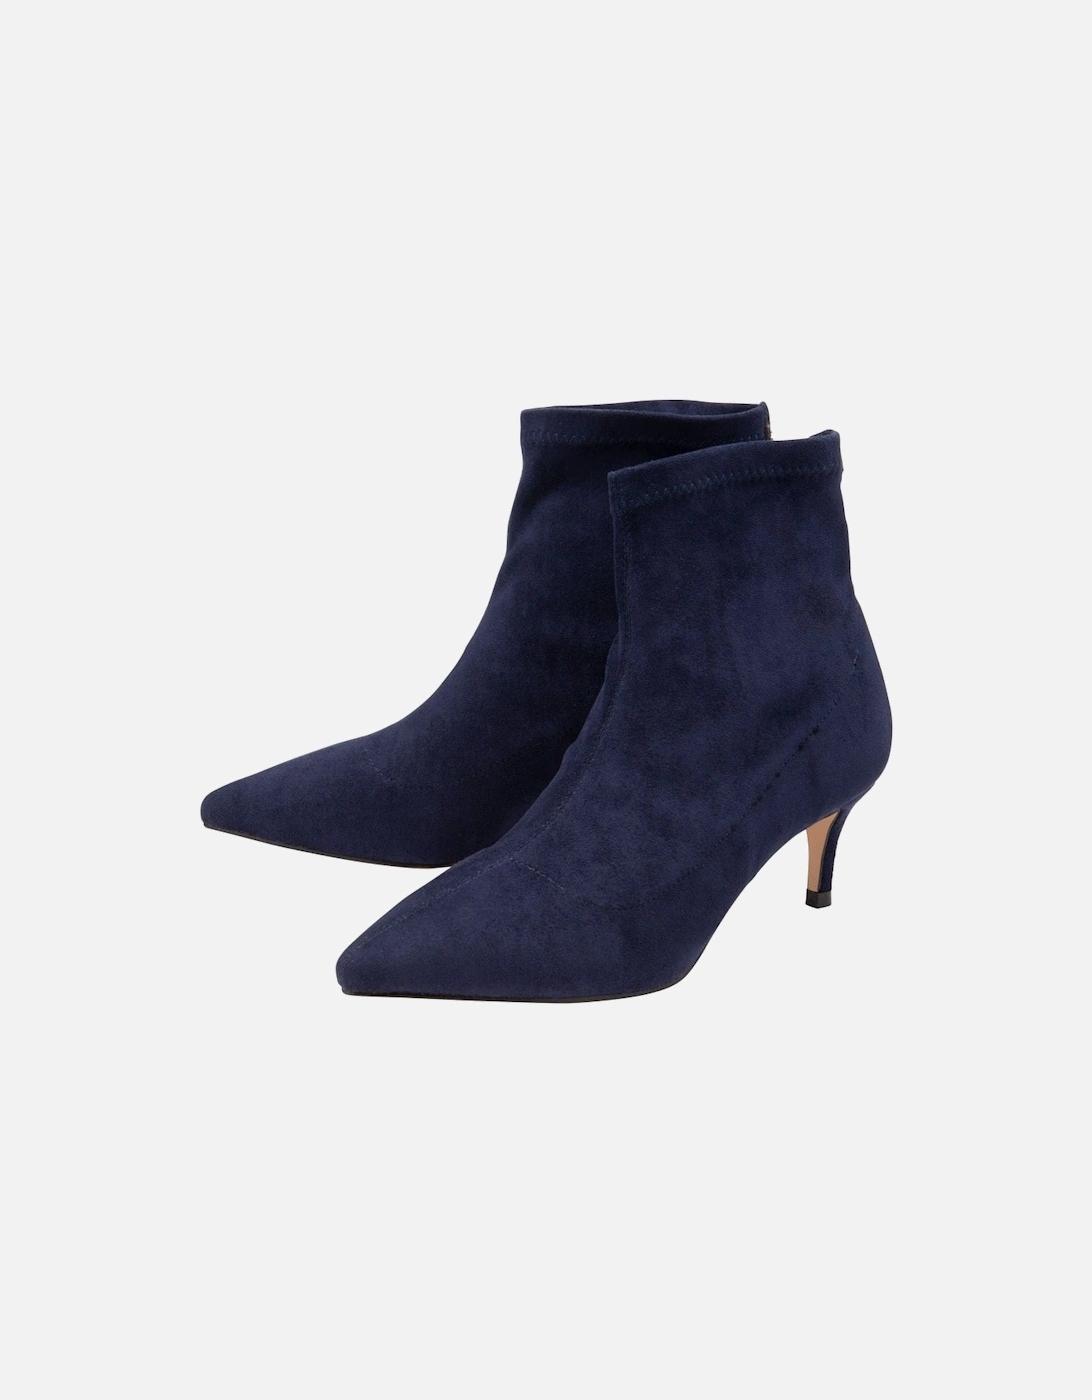 Madruga Womens Ankle Boots